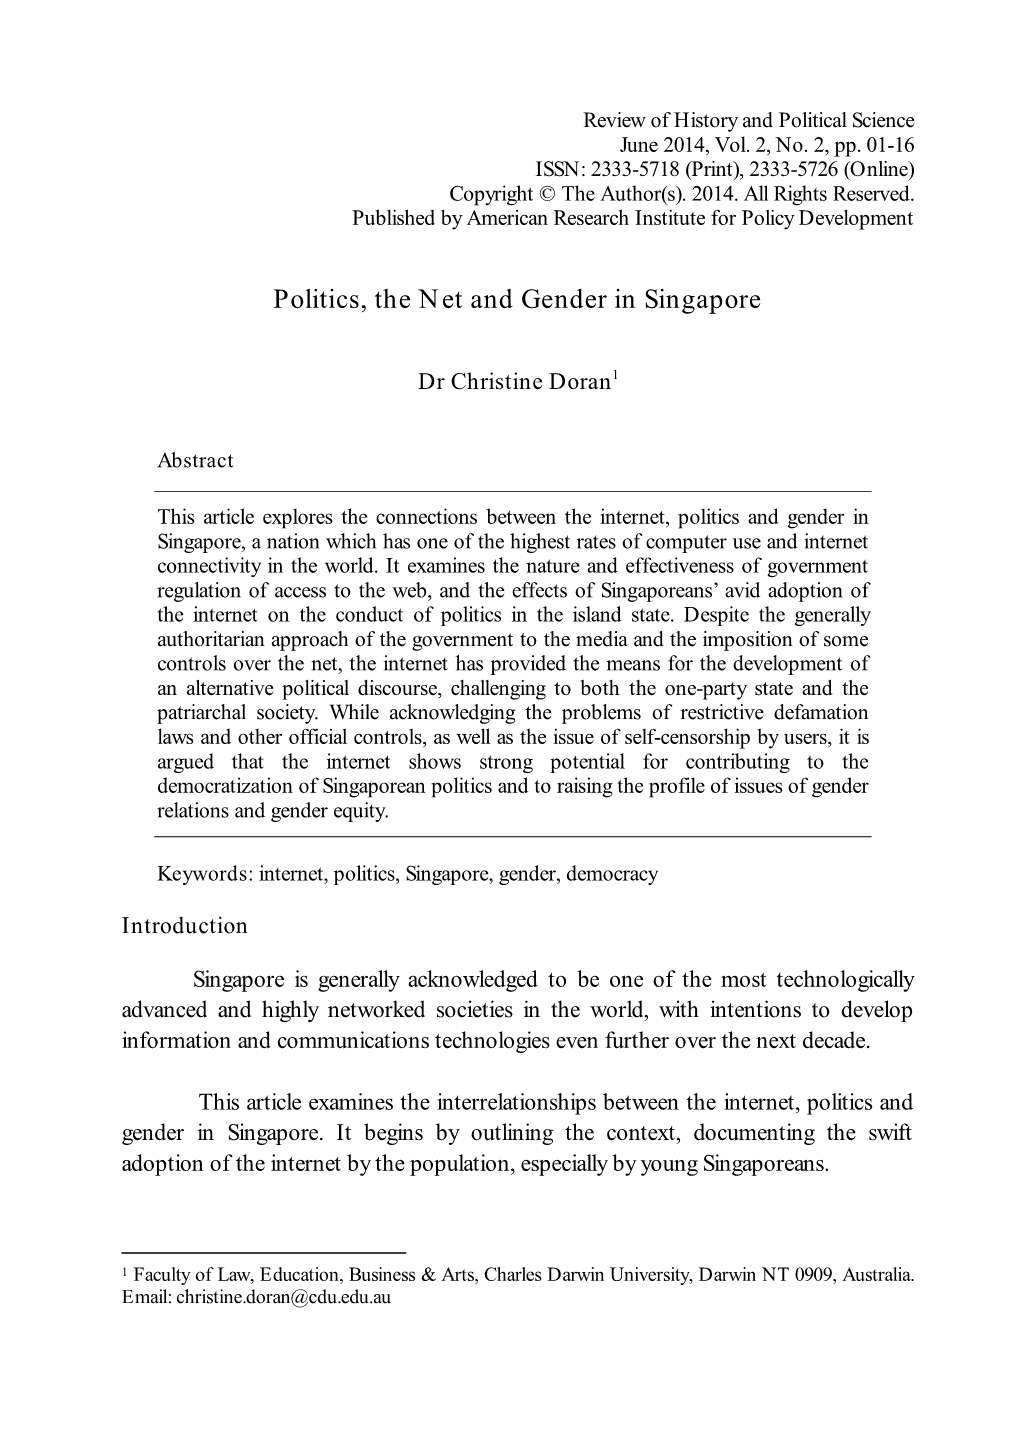 Politics, the Net and Gender in Singapore